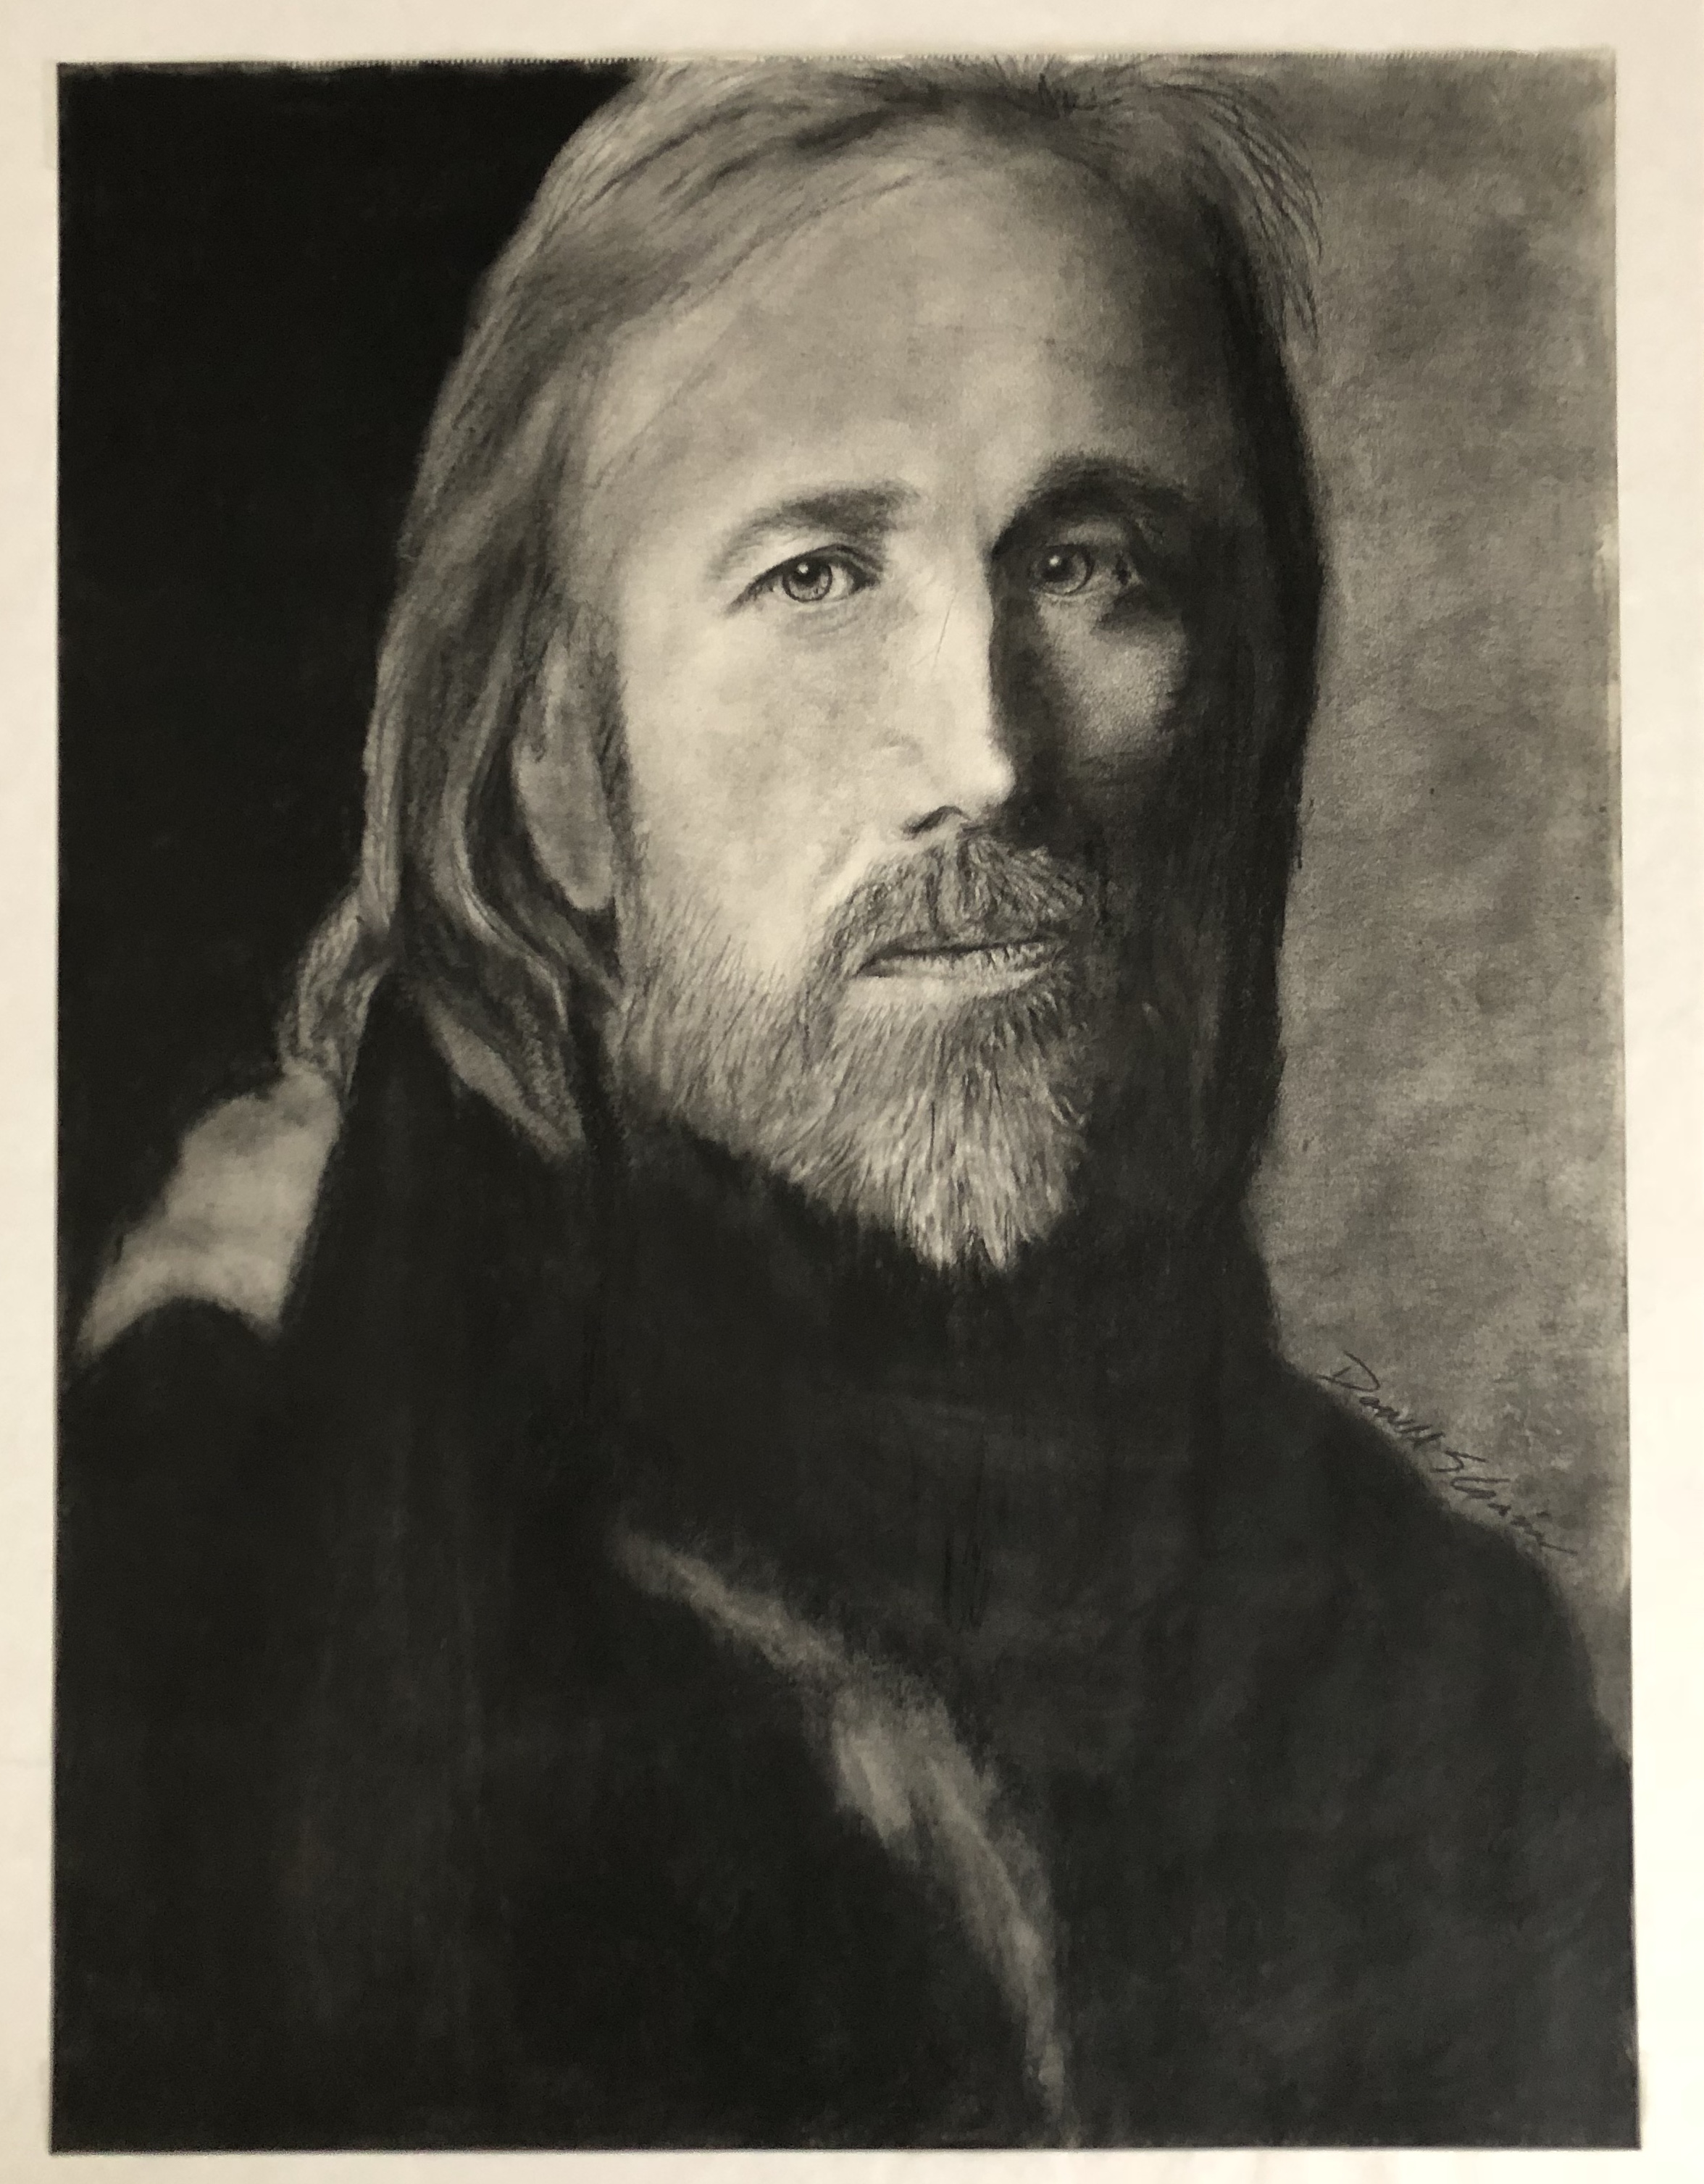 Tom Petty Charcoal I Did In 1995.